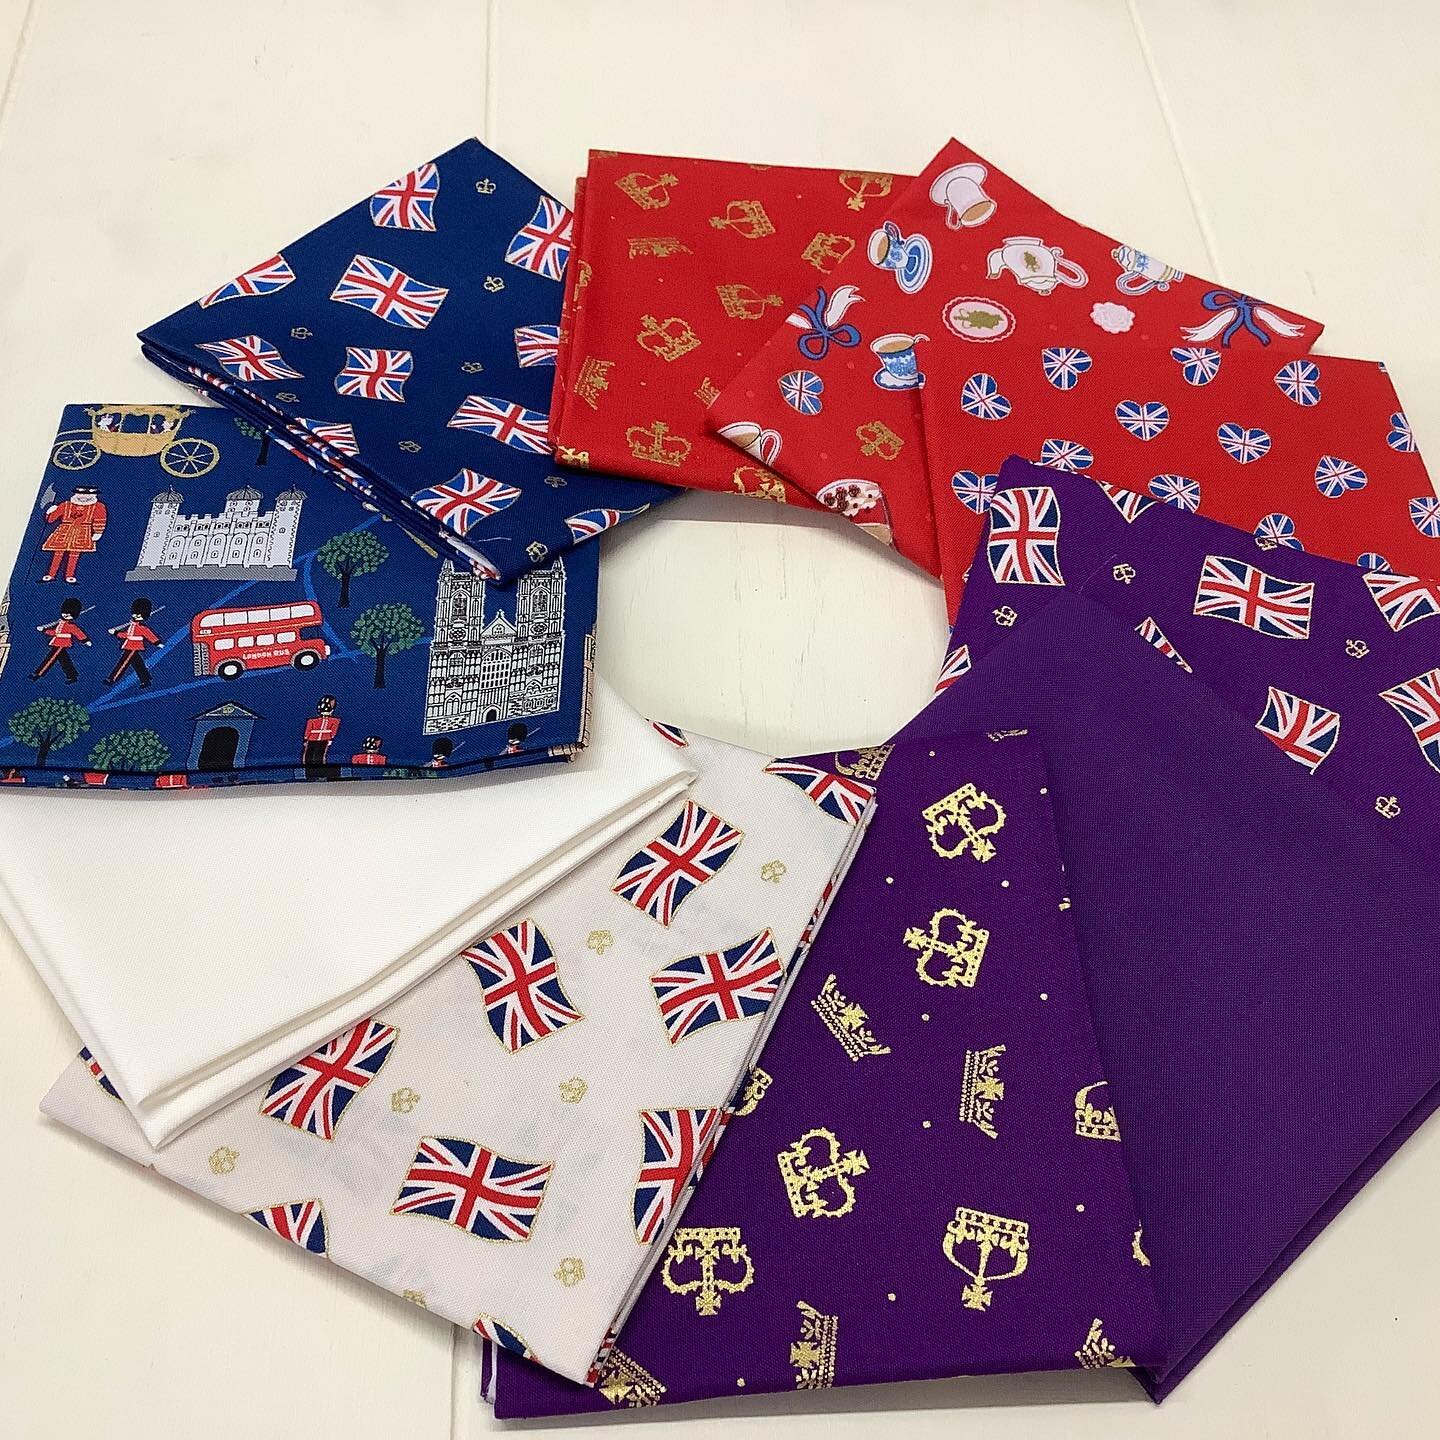 🇬🇧 Let&rsquo;s talk Coronation weekend! 🇬🇧

On Saturday, Hometown will be open in the afternoon. We&rsquo;re also open on Sunday (it&rsquo;s the first Sunday of May) 11-3. 

Plus, we only have 2 Coronation bundles left (ideal for napkins; simply 